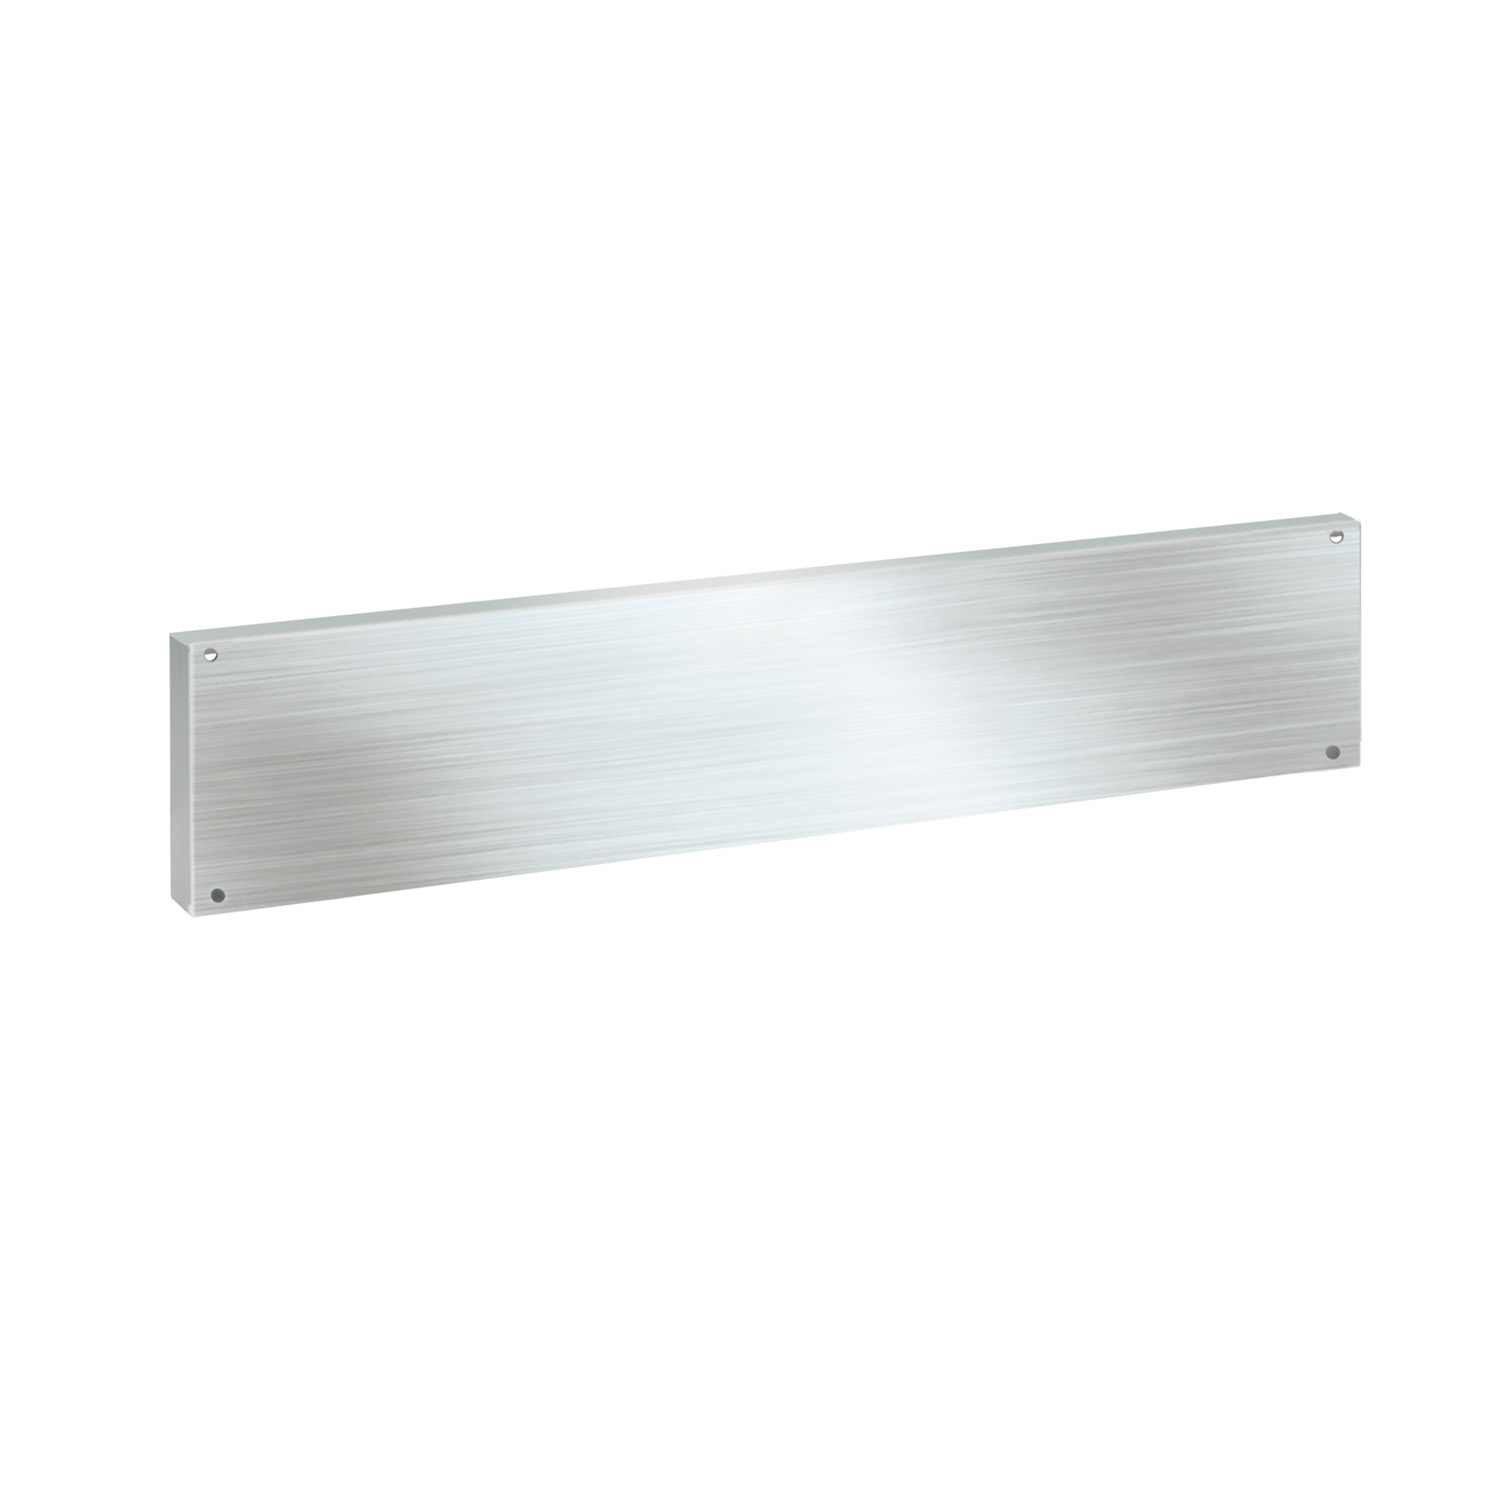 Stainless steel back panel (160 x 900mm)